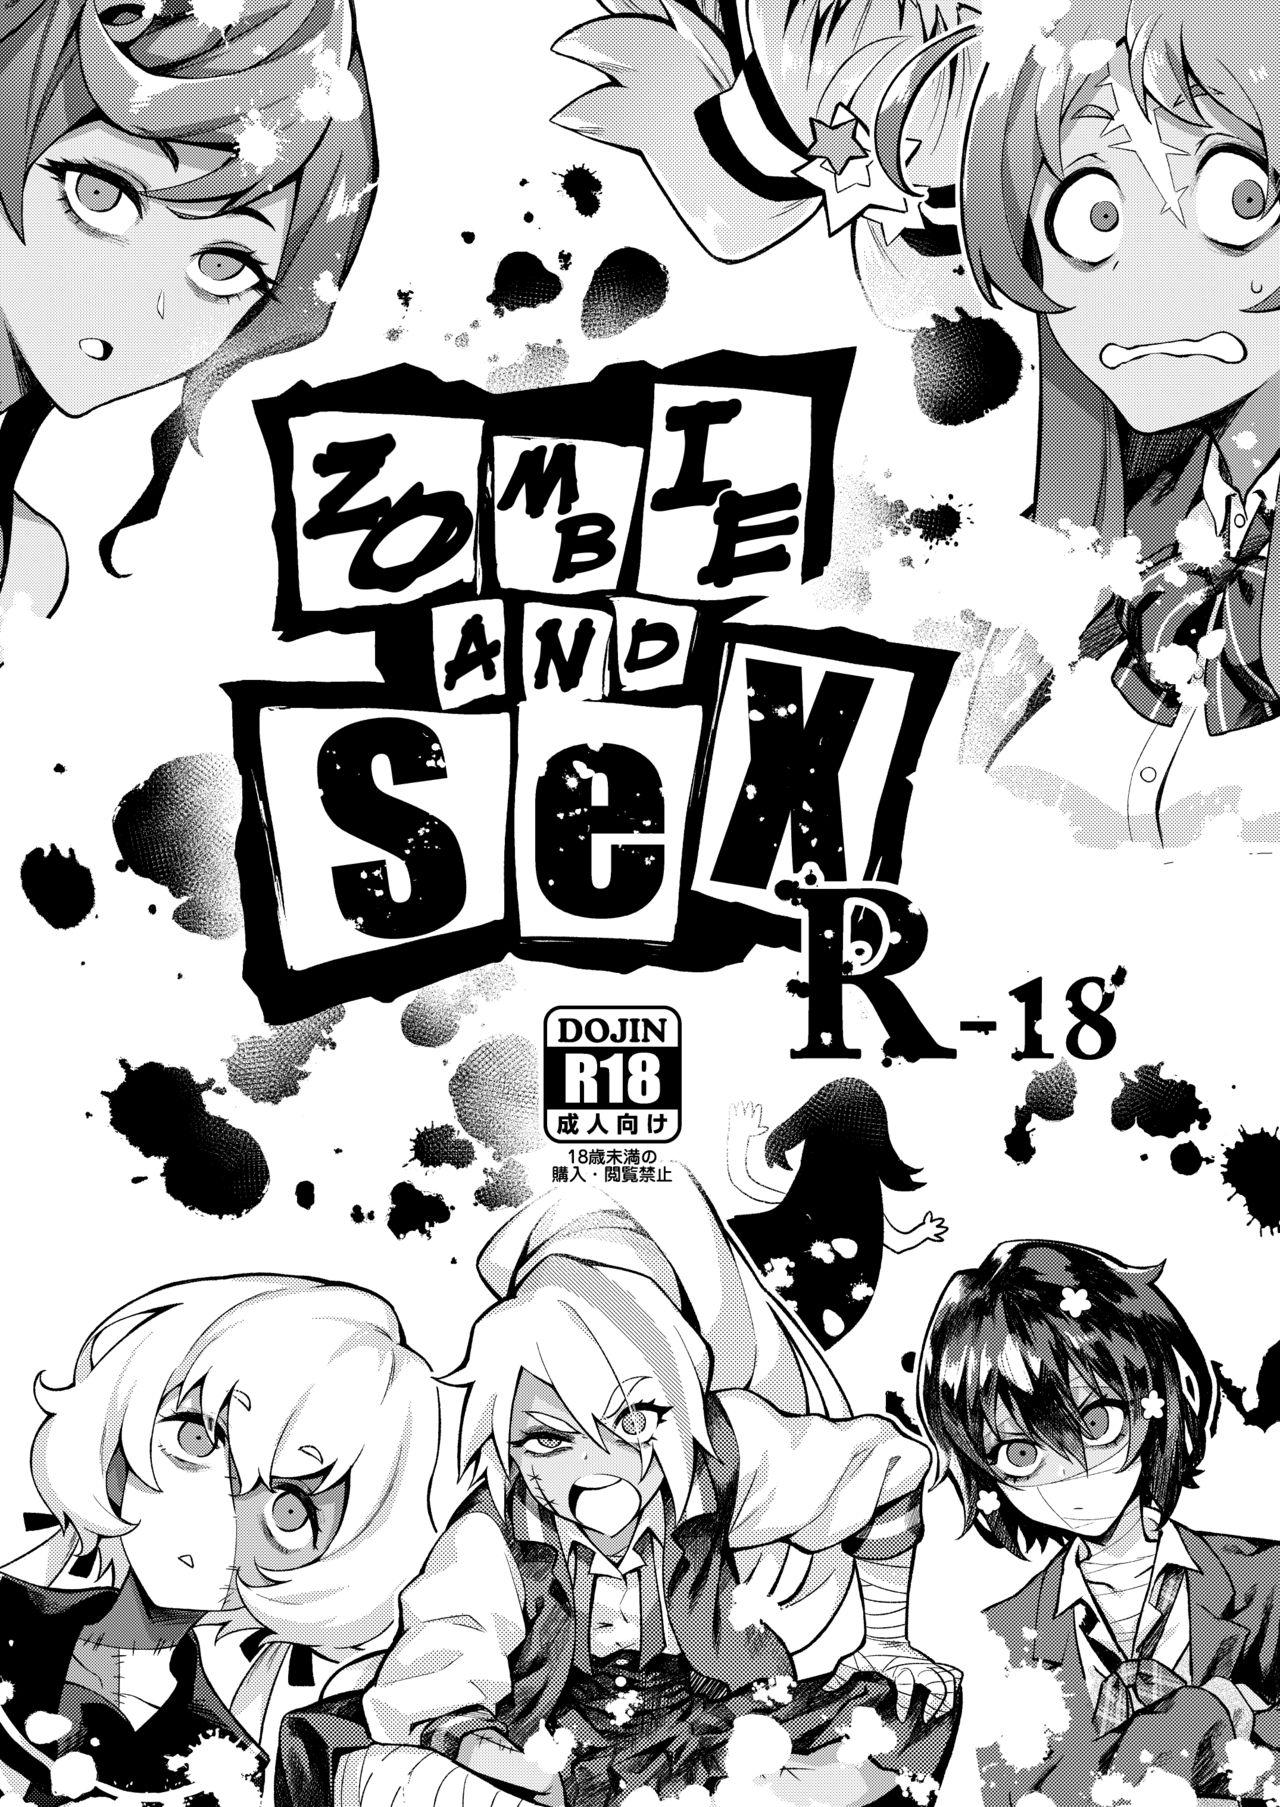 Zombie and SEX 0